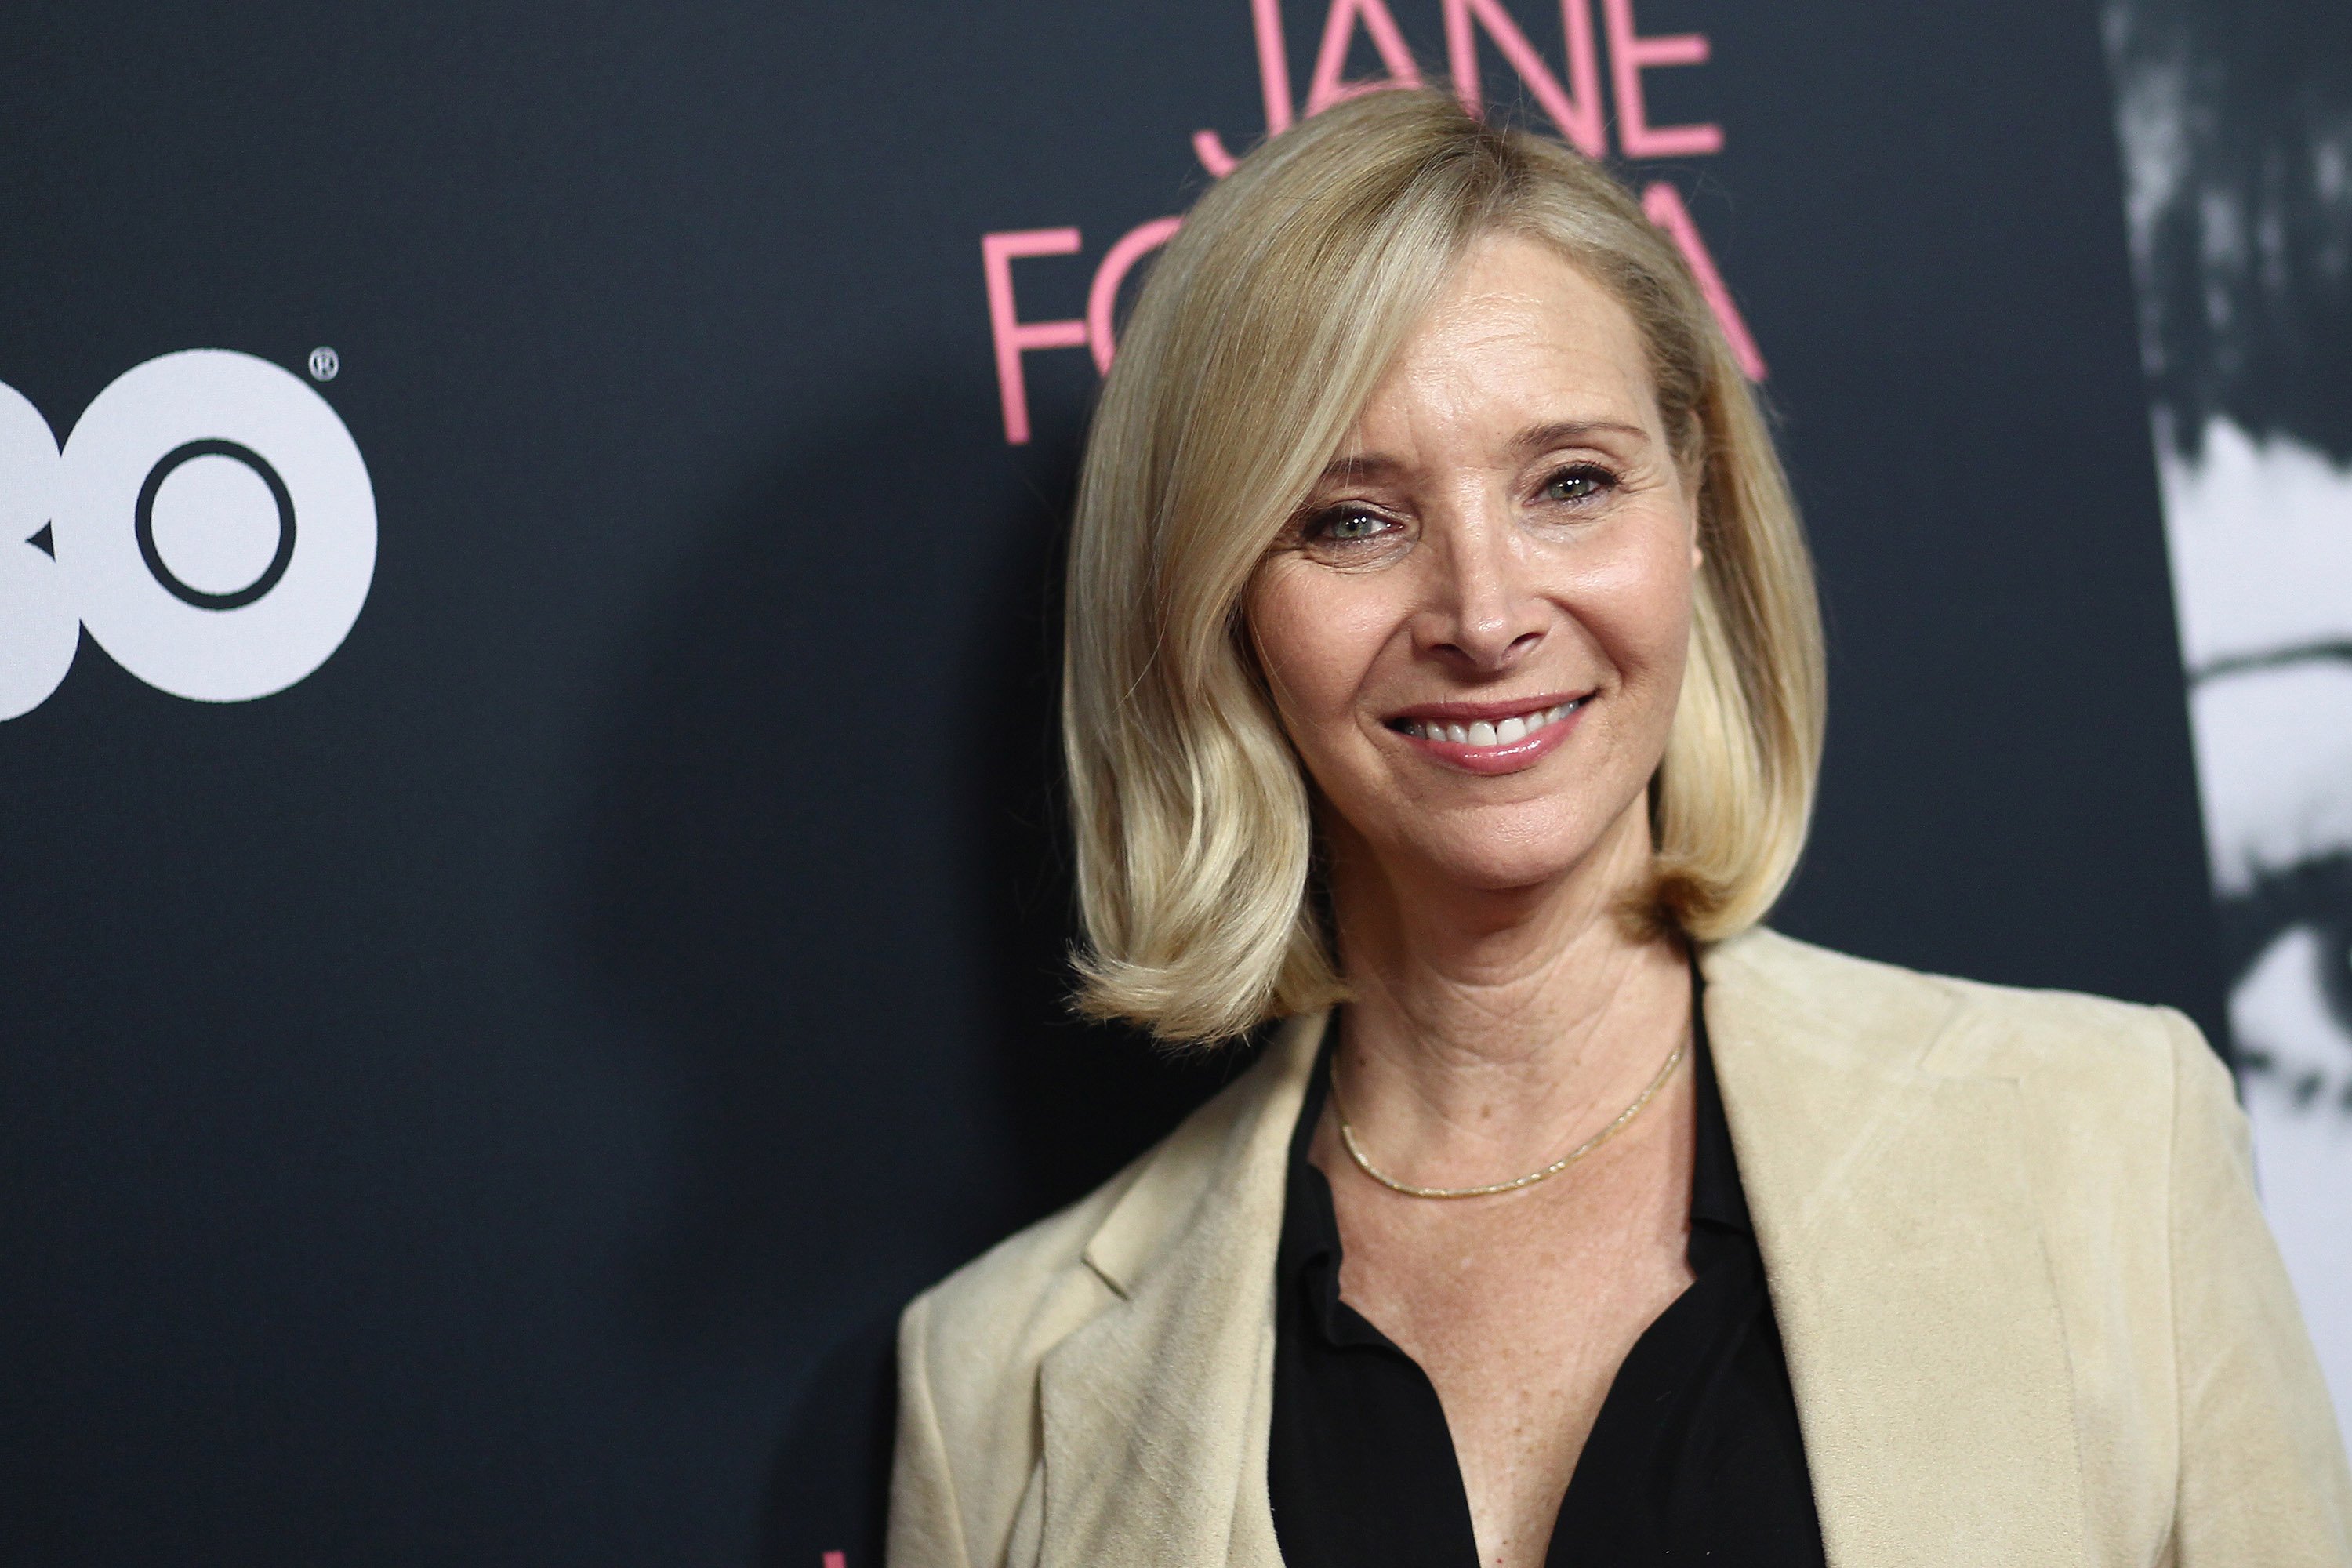 Lisa Kudrow at the premiere of 'Jane Fonda in Five Acts'